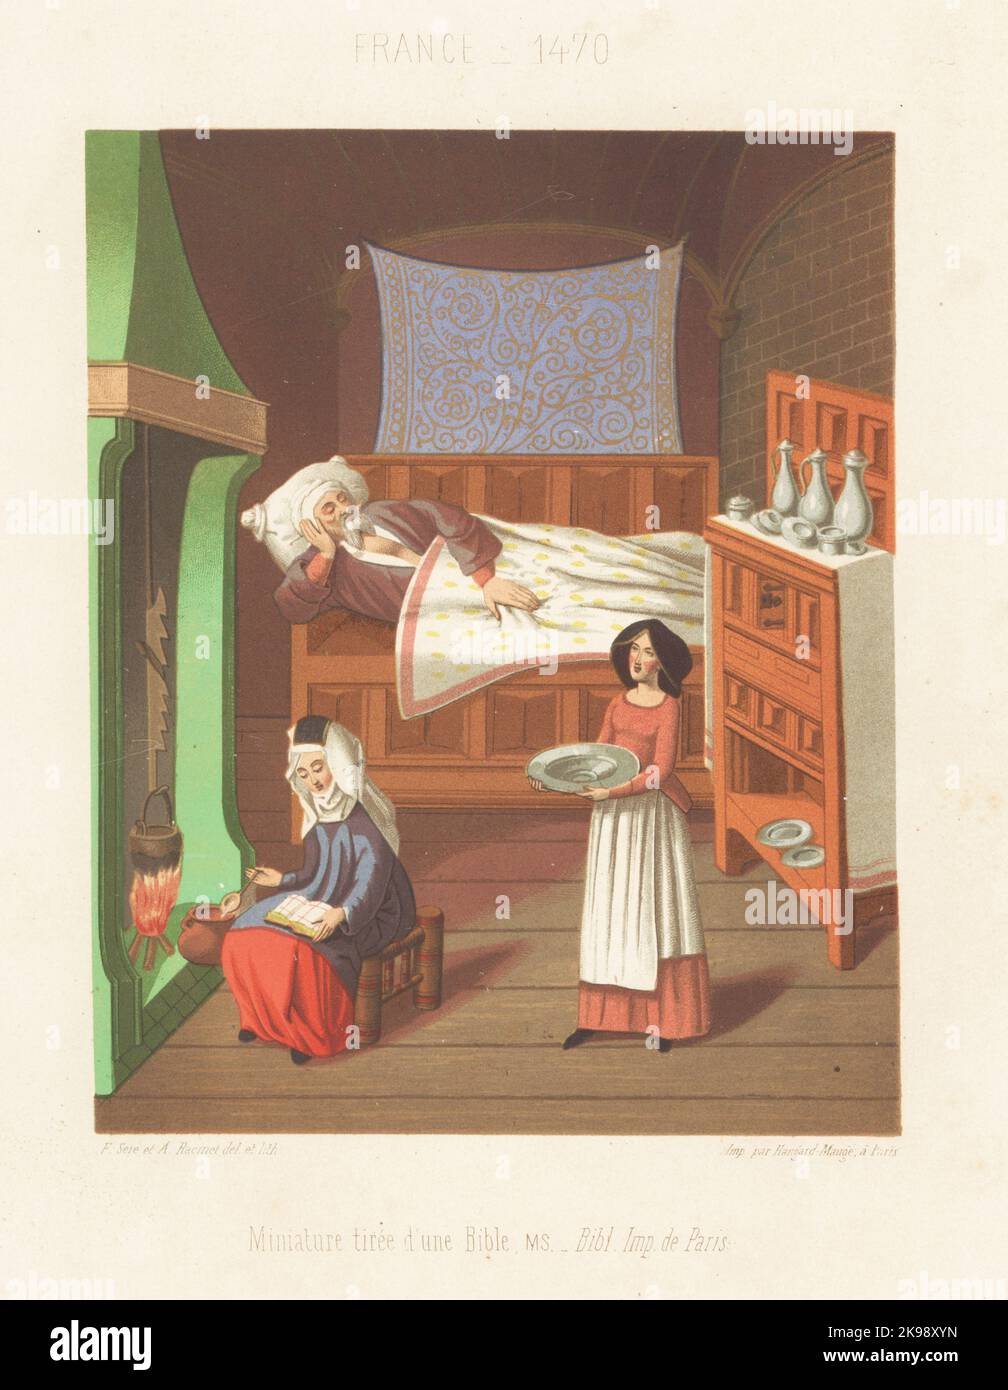 French room interior with furniture, 15th century. A woman stirs a pot at the hearth, a man lies in a bed by the window, and a maid brings a platter from the dresser. Miniature from a manuscript Bible, 1470, Bibliotheque Imperiale de Paris. Chromolithograph by Ferdinand Sere and Auguste Racinet from Charles Louandre’s Les Arts Somptuaires, The Sumptuary Arts, Hangard-Mauge, Paris, 1858. Stock Photo